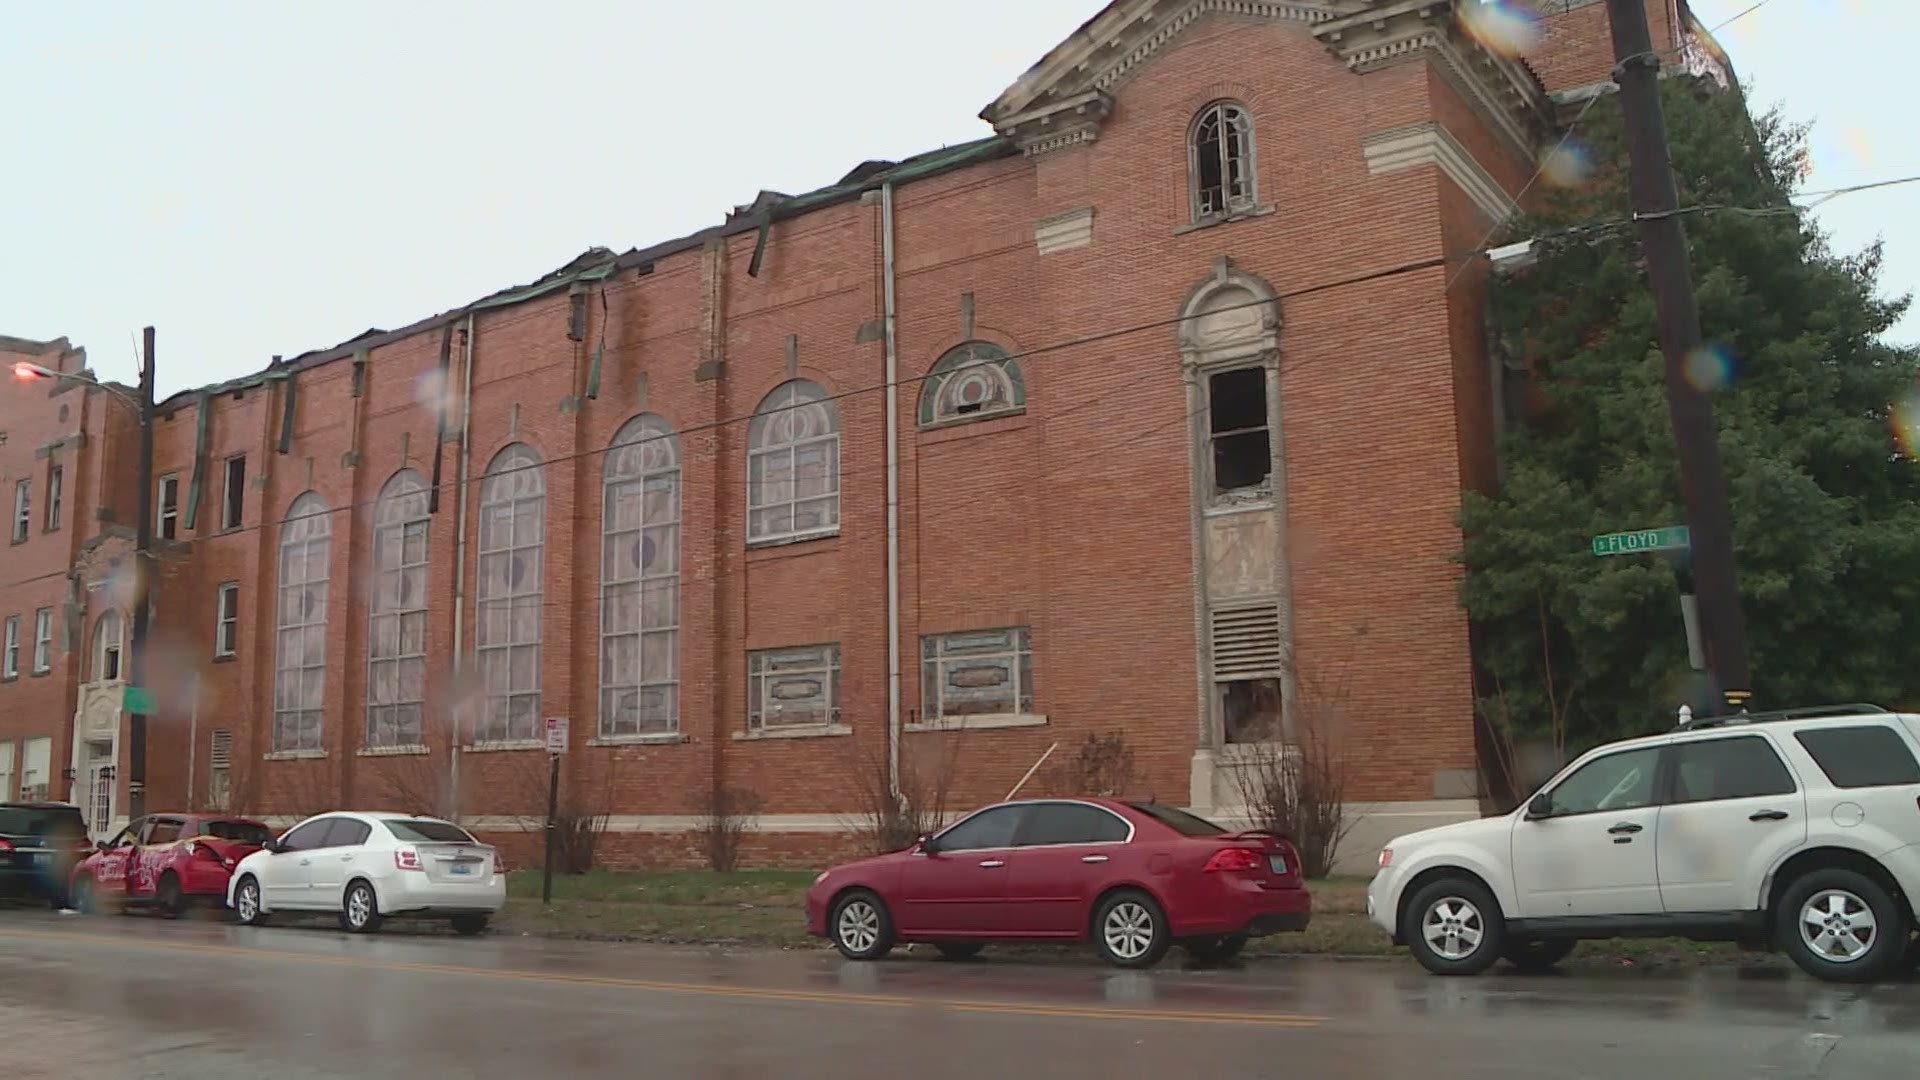 Investigators are still working to determine the cause of that two-alarm fire at the old church that was also a synagogue years ago.